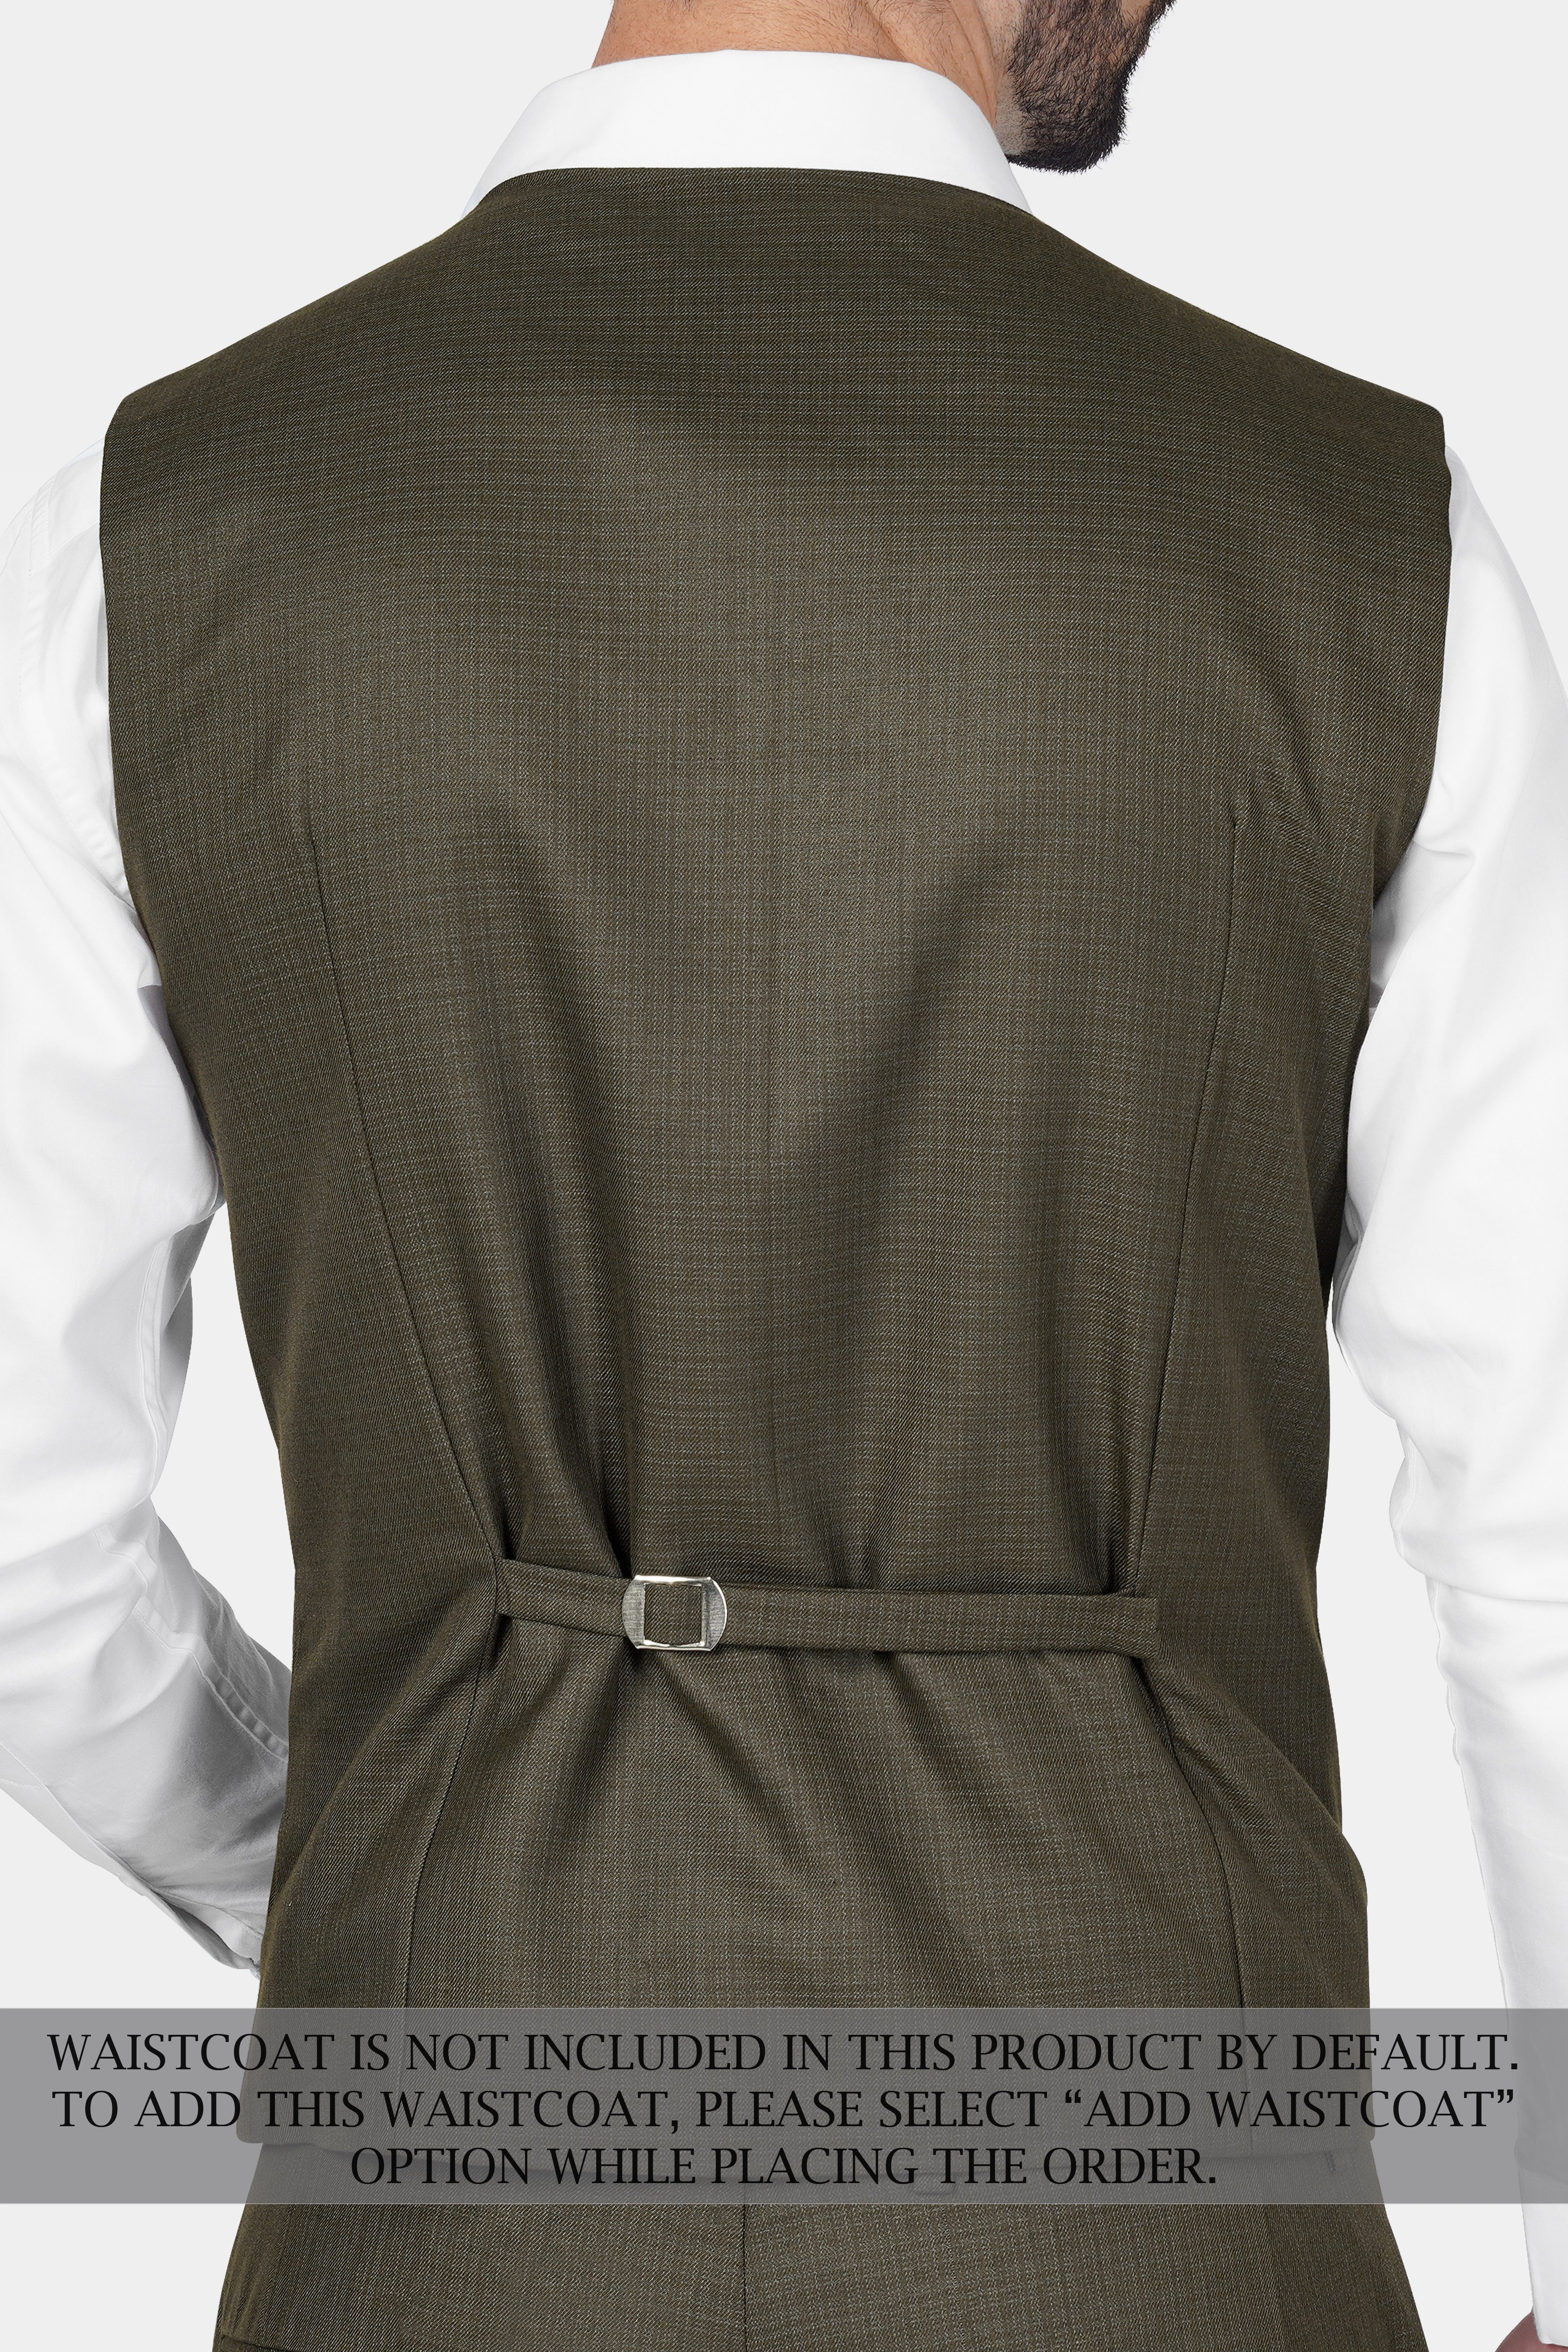 Eclipse Brown Wool Rich Double Breasted Sports Suit ST3133-DB-PP-36, ST3133-DB-PP-38, ST3133-DB-PP-40, ST3133-DB-PP-42, ST3133-DB-PP-44, ST3133-DB-PP-46, ST3133-DB-PP-48, ST3133-DB-PP-50, ST3133-DB-PP-52, ST3133-DB-PP-54, ST3133-DB-PP-56, ST3133-DB-PP-58, ST3133-DB-PP-60